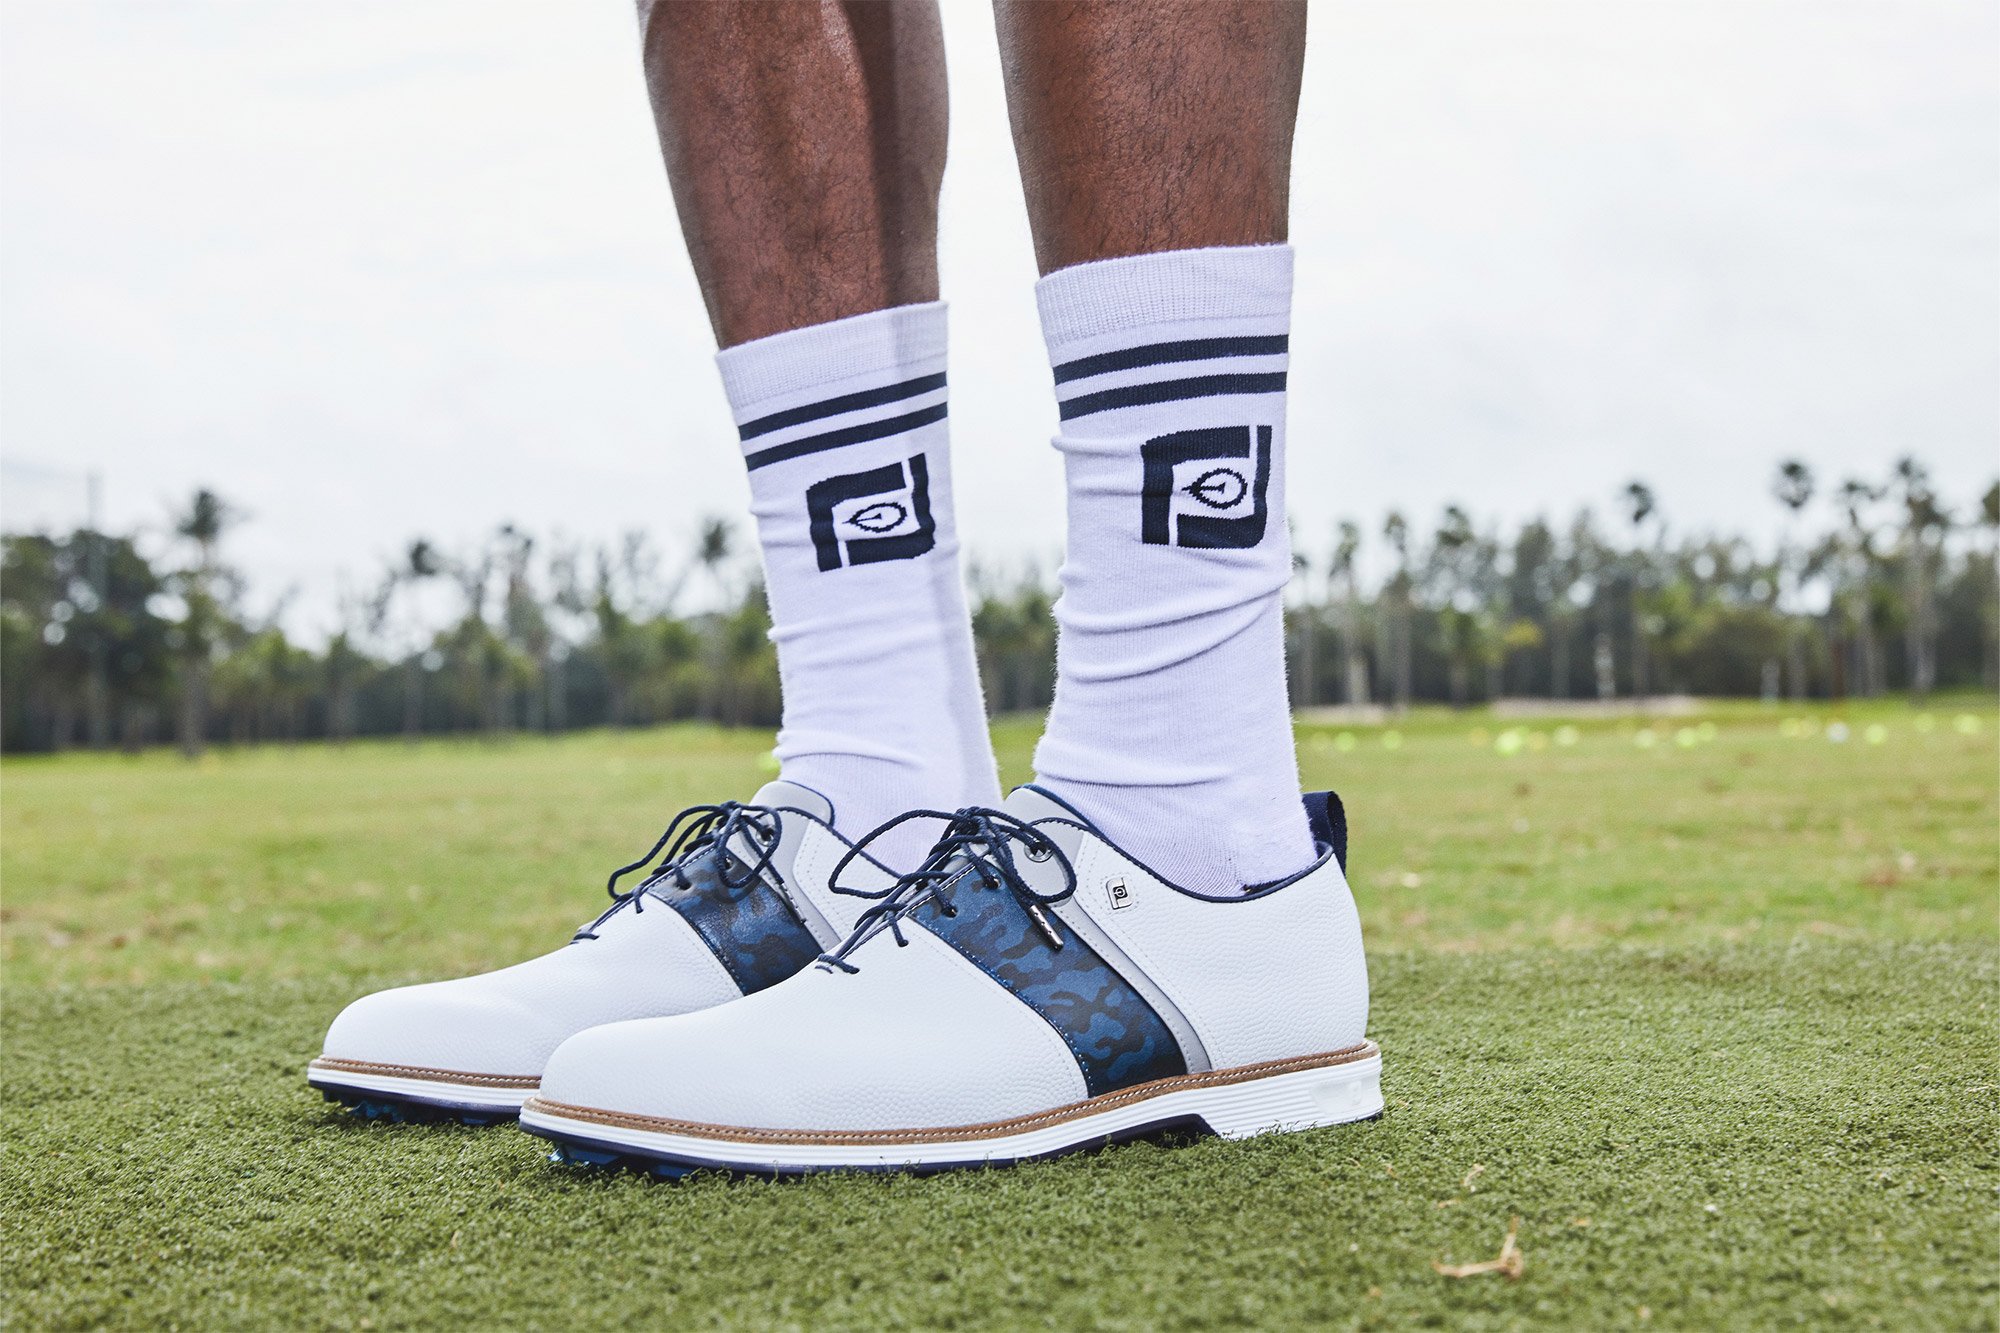 Footjoy's New Limited-Edition Shoe Nods to a Historic U.S. Open